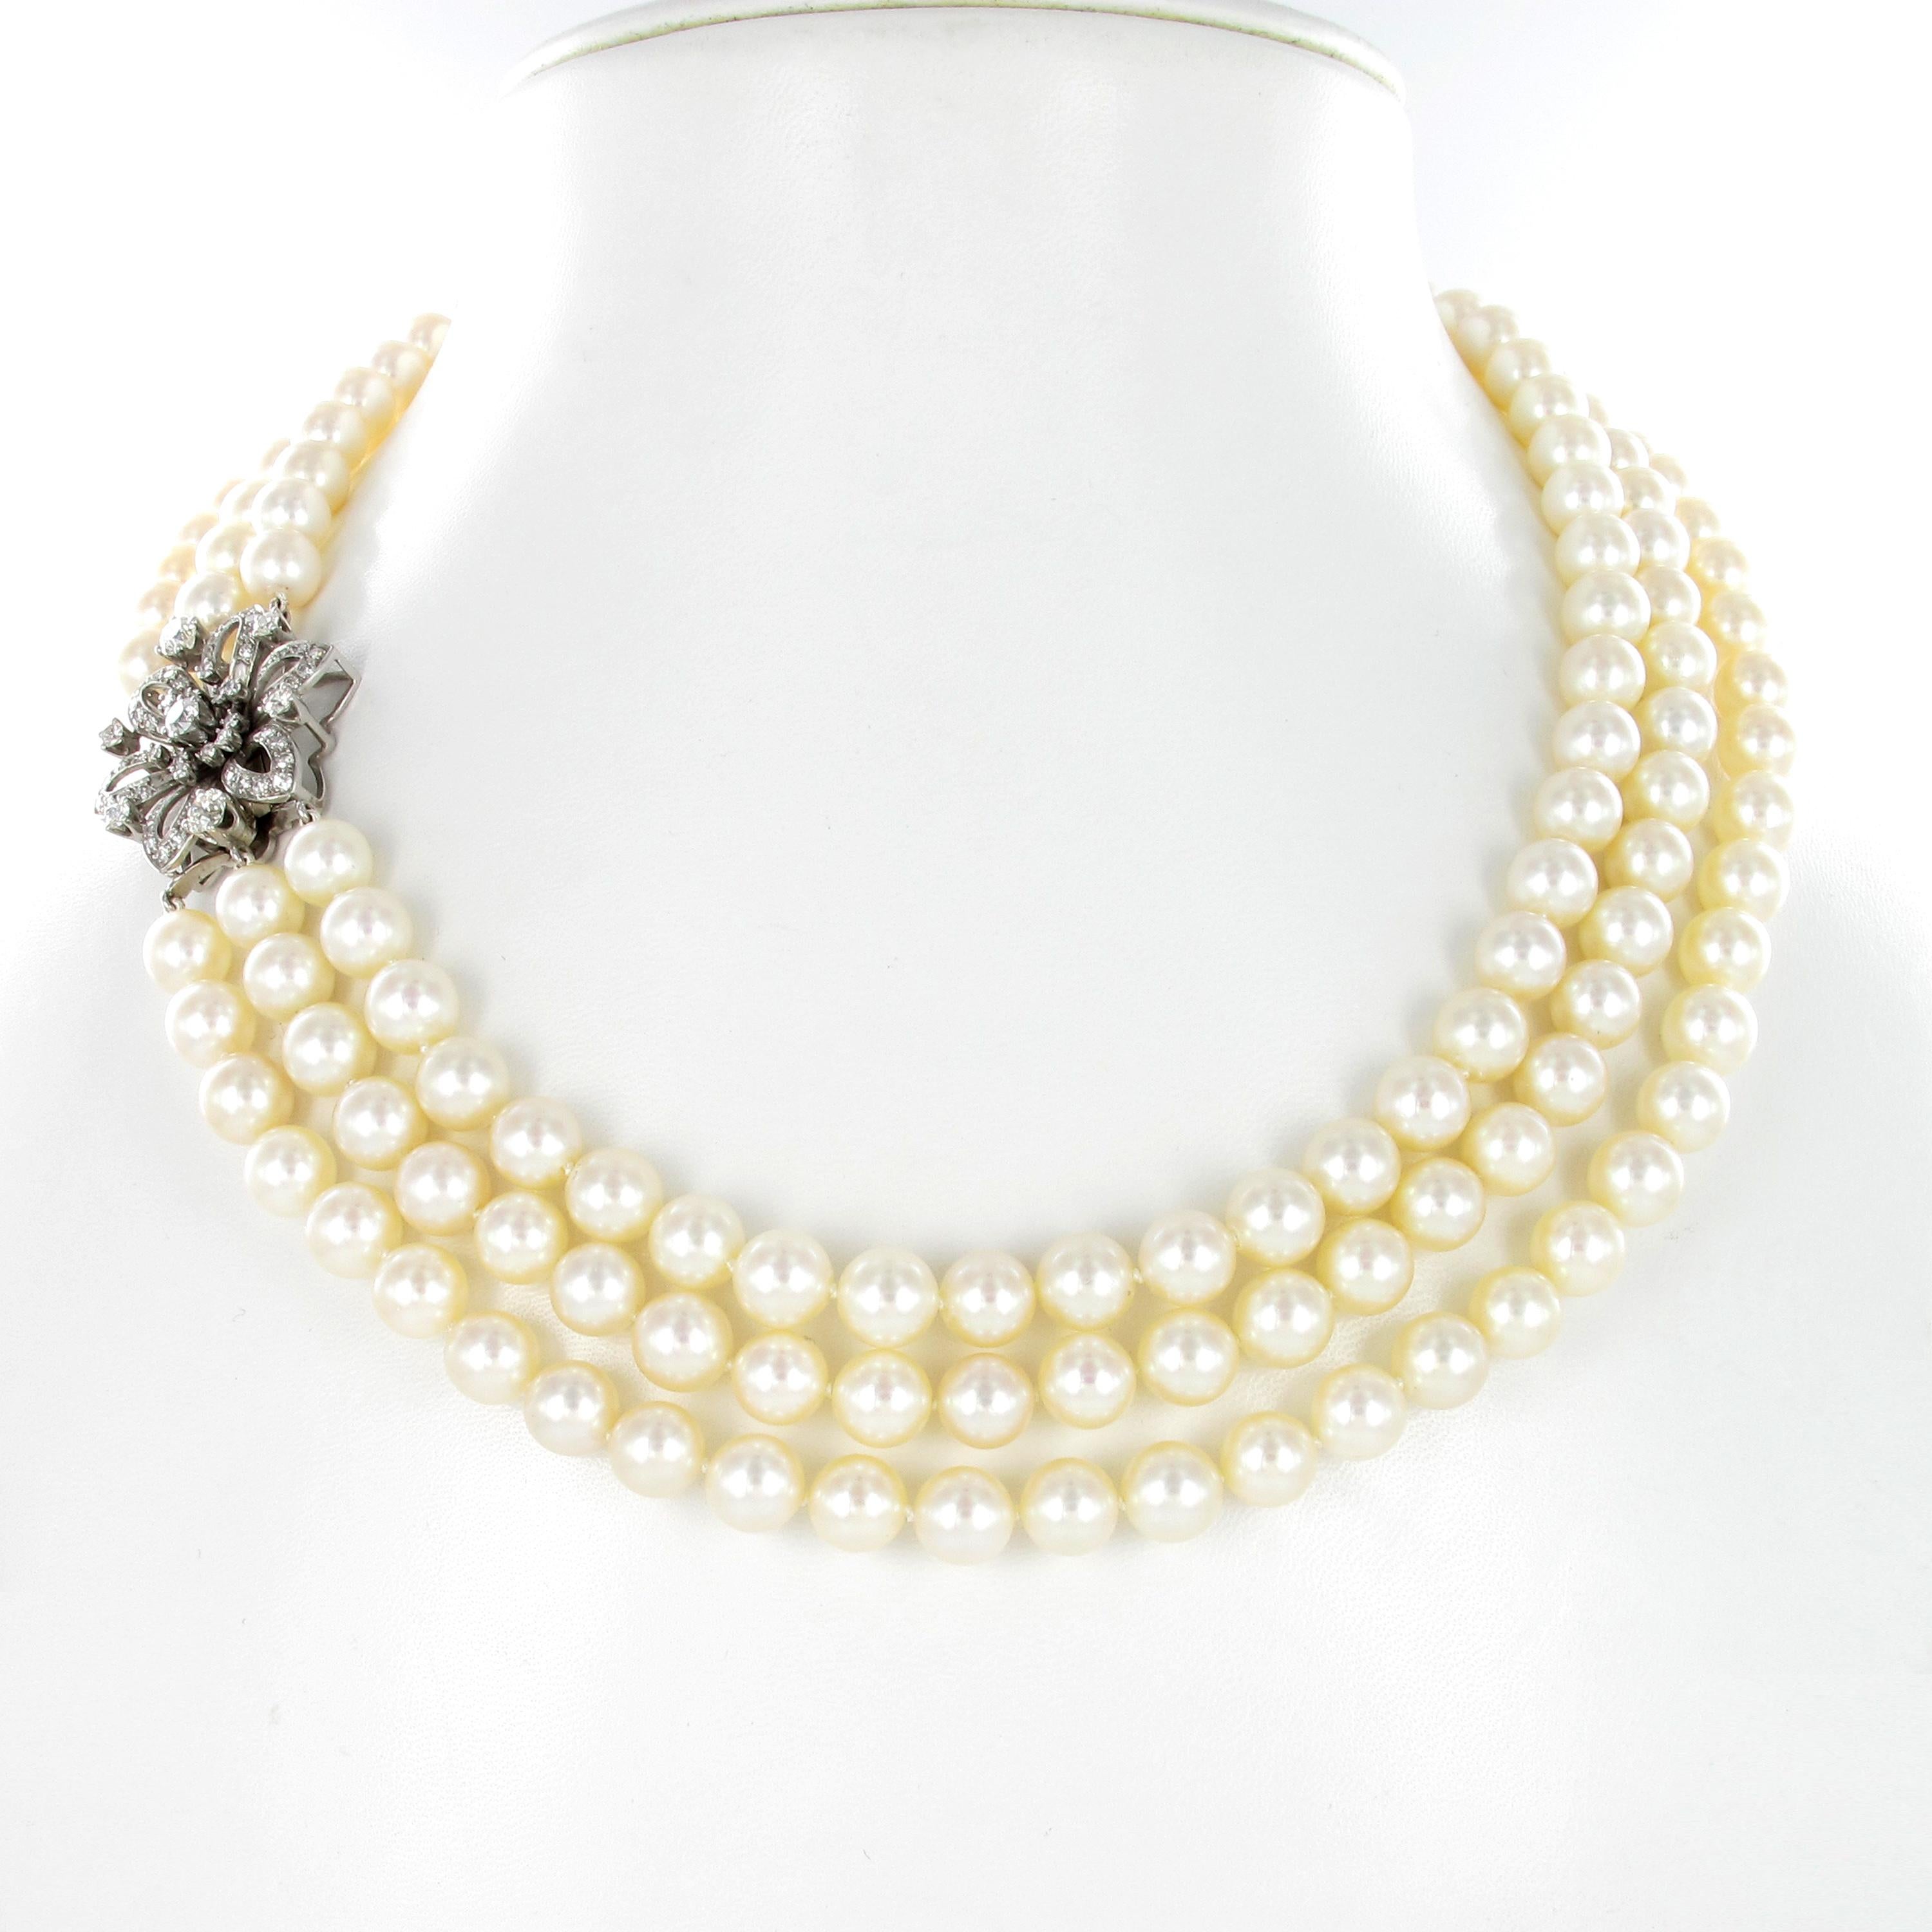 This Breakfast at Tiffany's like 3-strand cultured pearl necklace goes with every little black dress. The 166 Akoya cultured pearls measure 8.0-8.5 millimeters and are adjusted to a beautiful flower clasp in 18 karat white gold, set with 61 Old